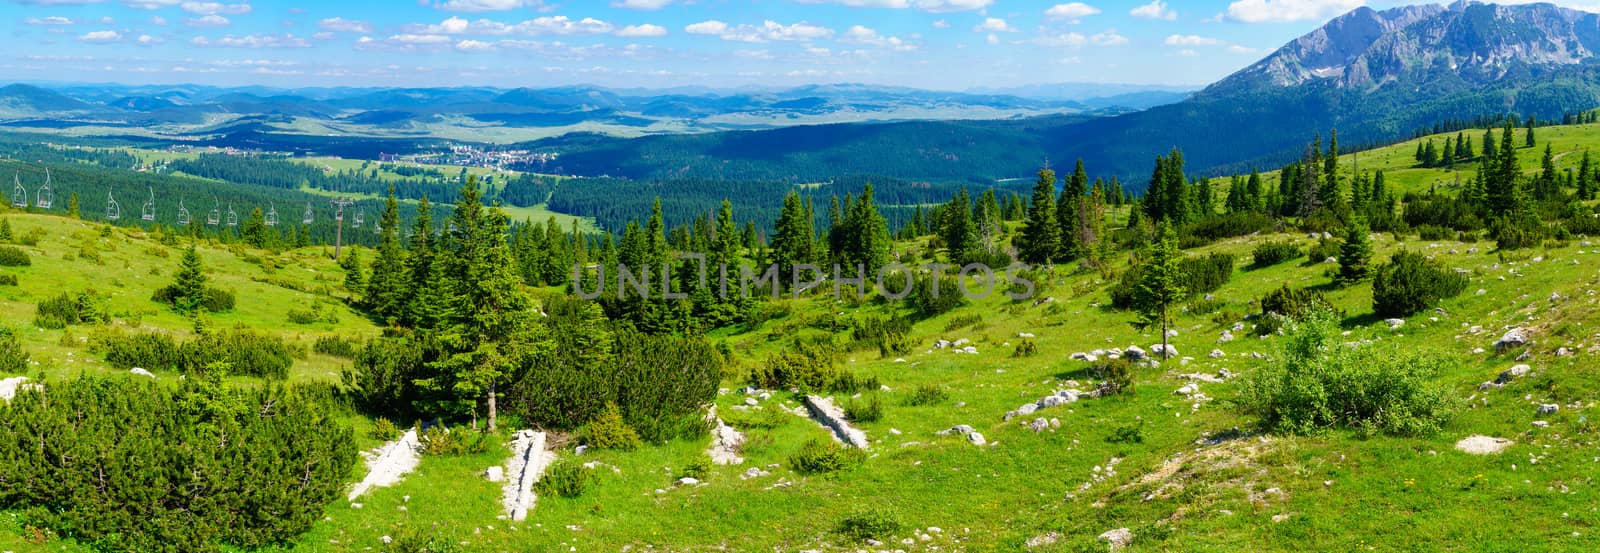 Panoramic landscape view and a ski lift in Durmitor National Park, Northern Montenegro